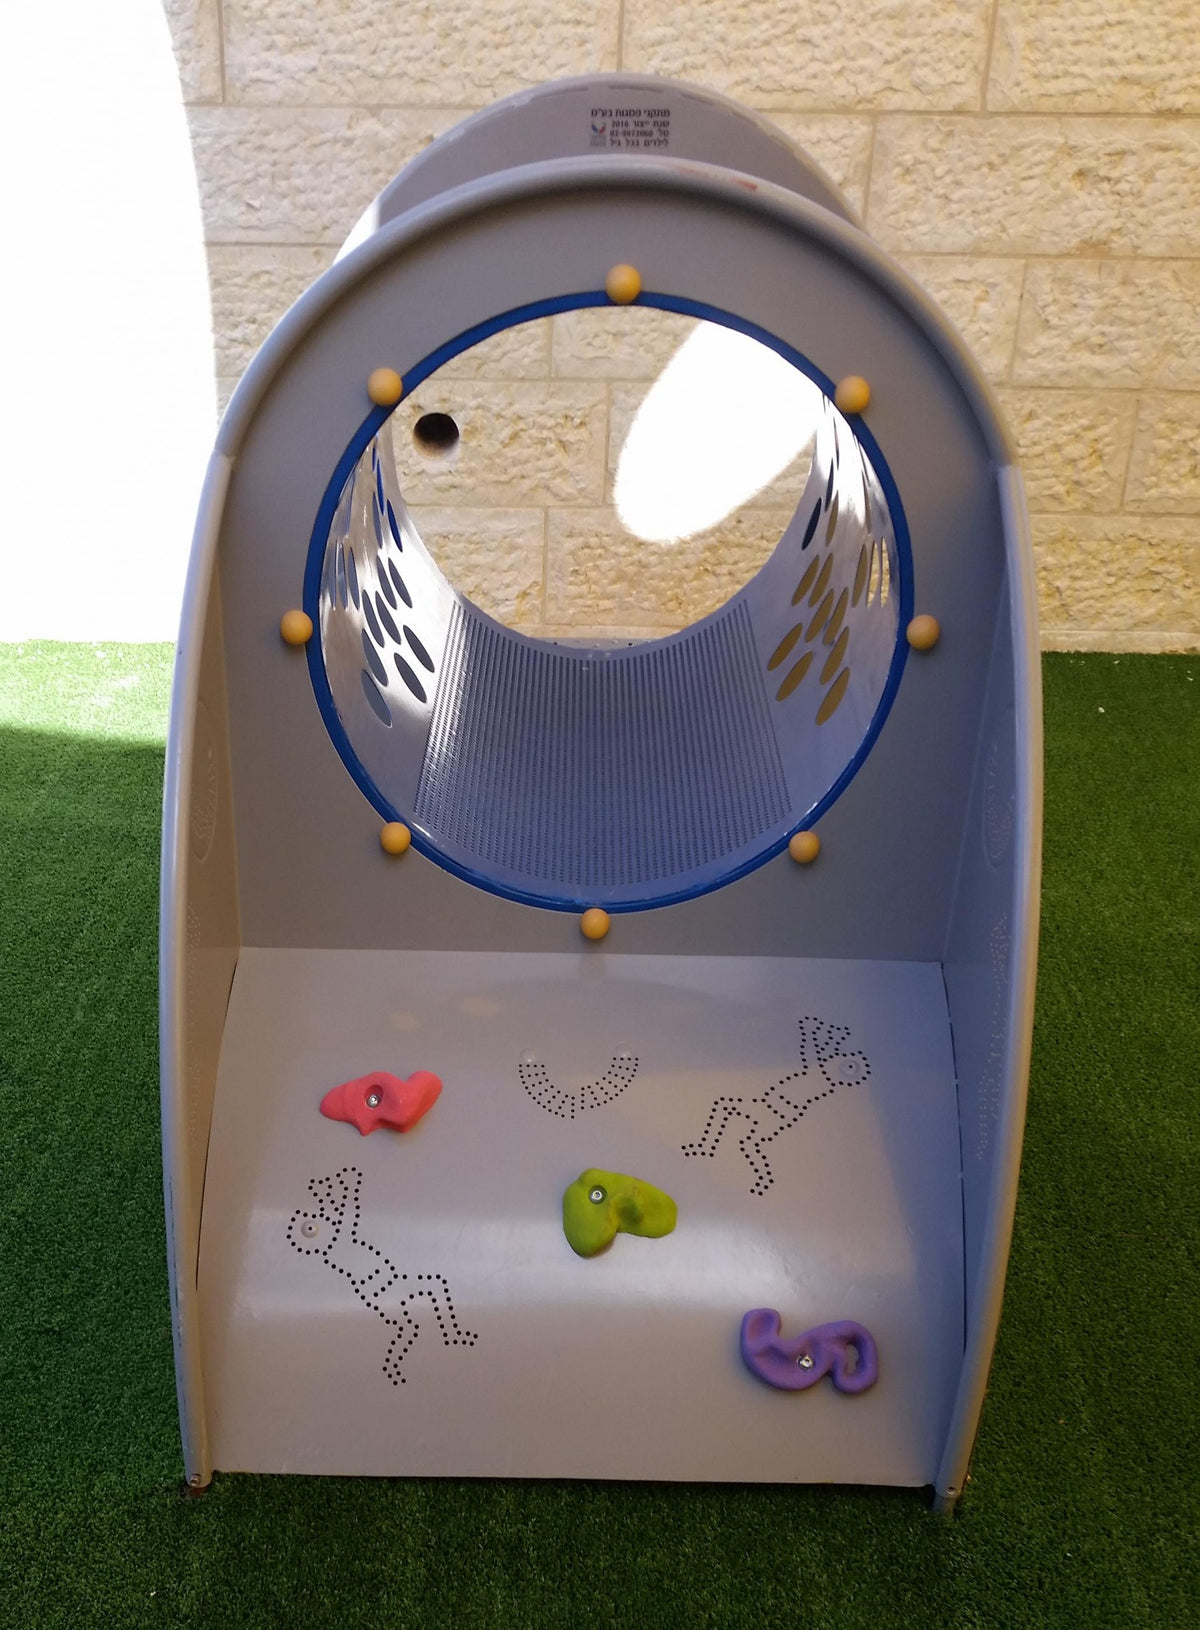 Psagot-Commercial-Playgrounds-Mini-Crawl-Tunnel-Build-Center